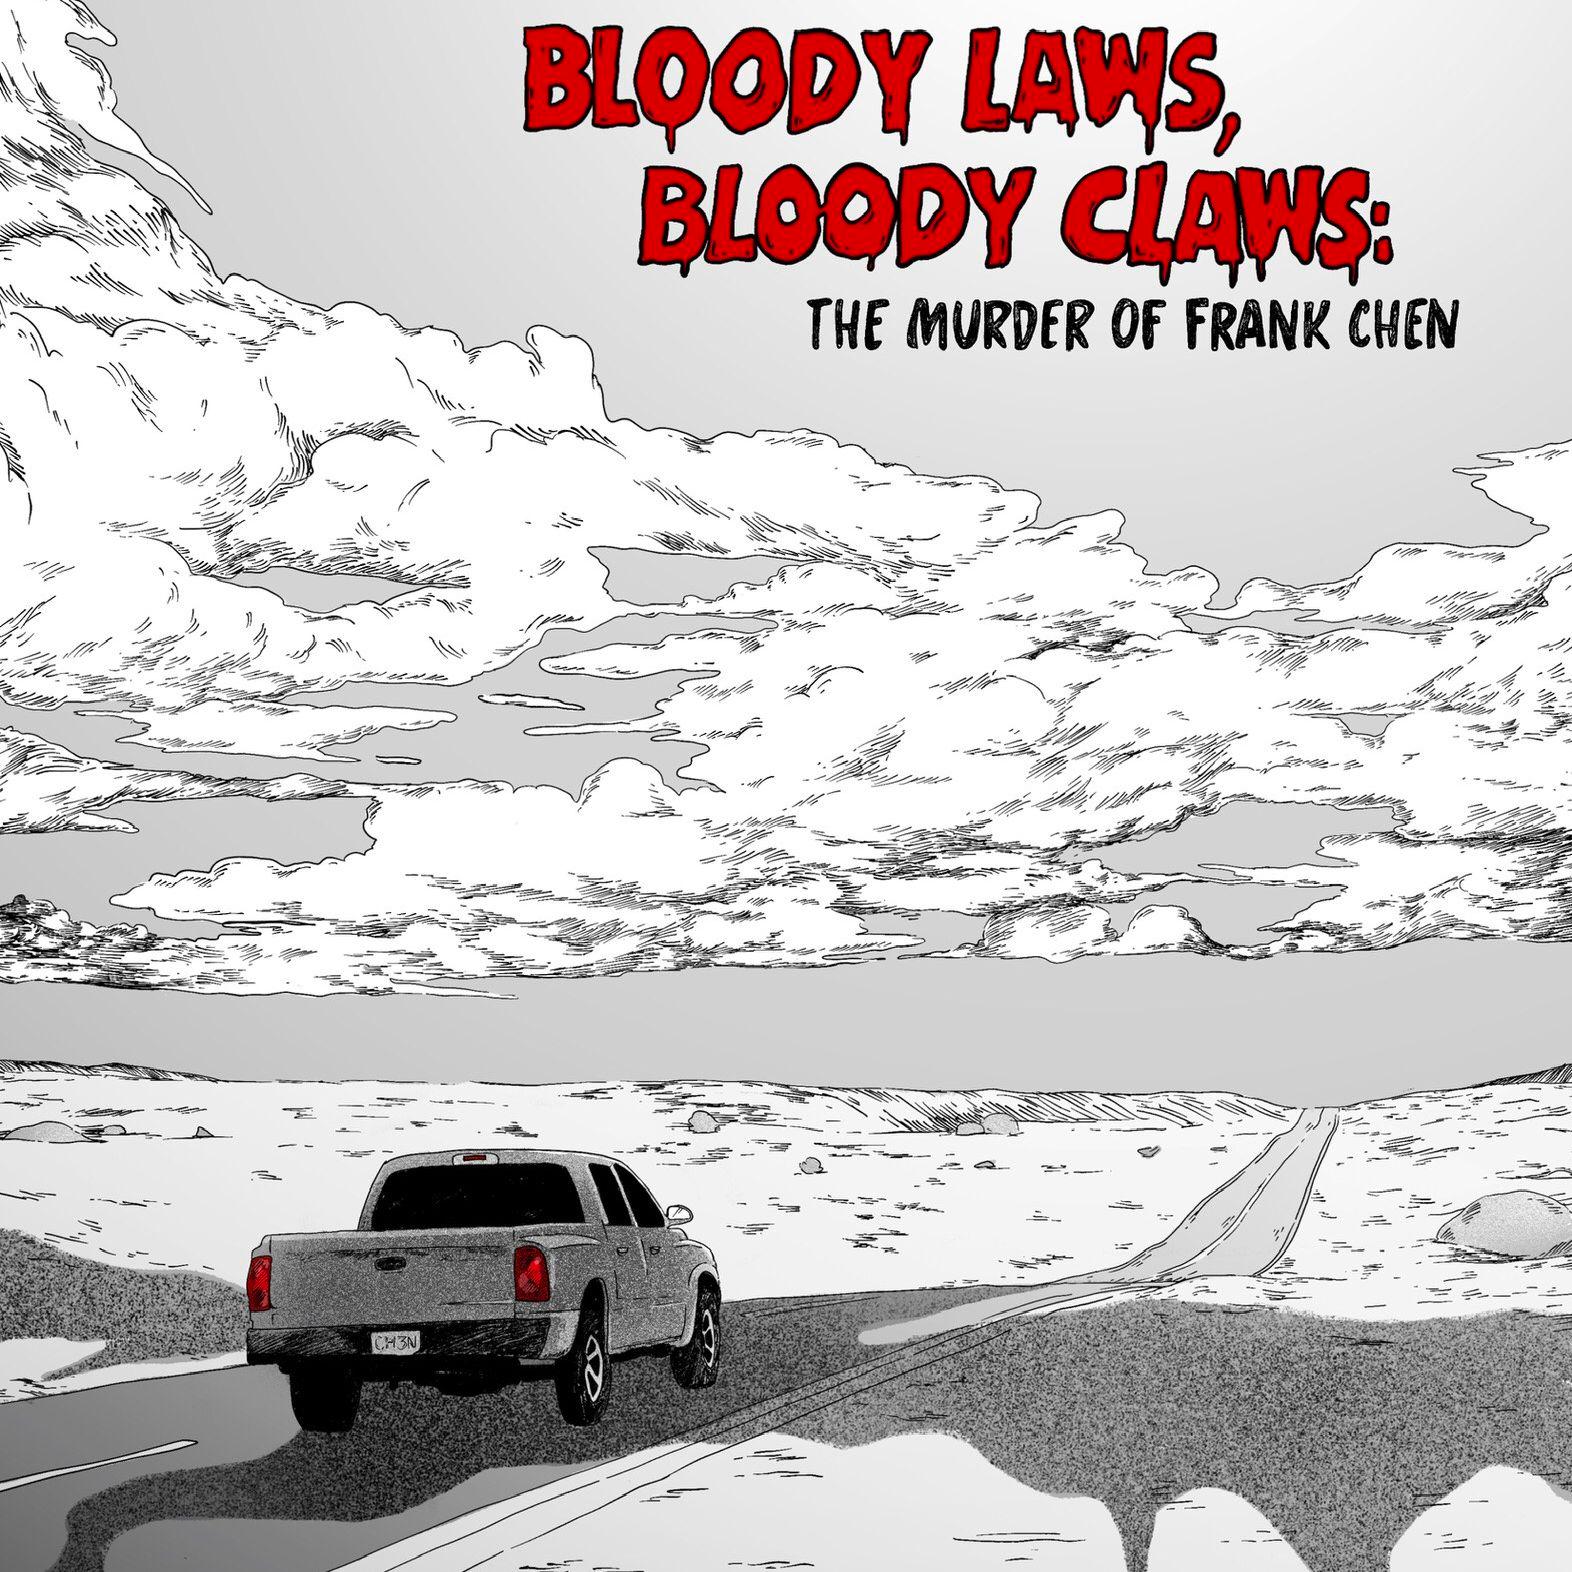 Thumbnail for "177 - Bloody Laws, Bloody Claws: The Murder of Frank Chen".